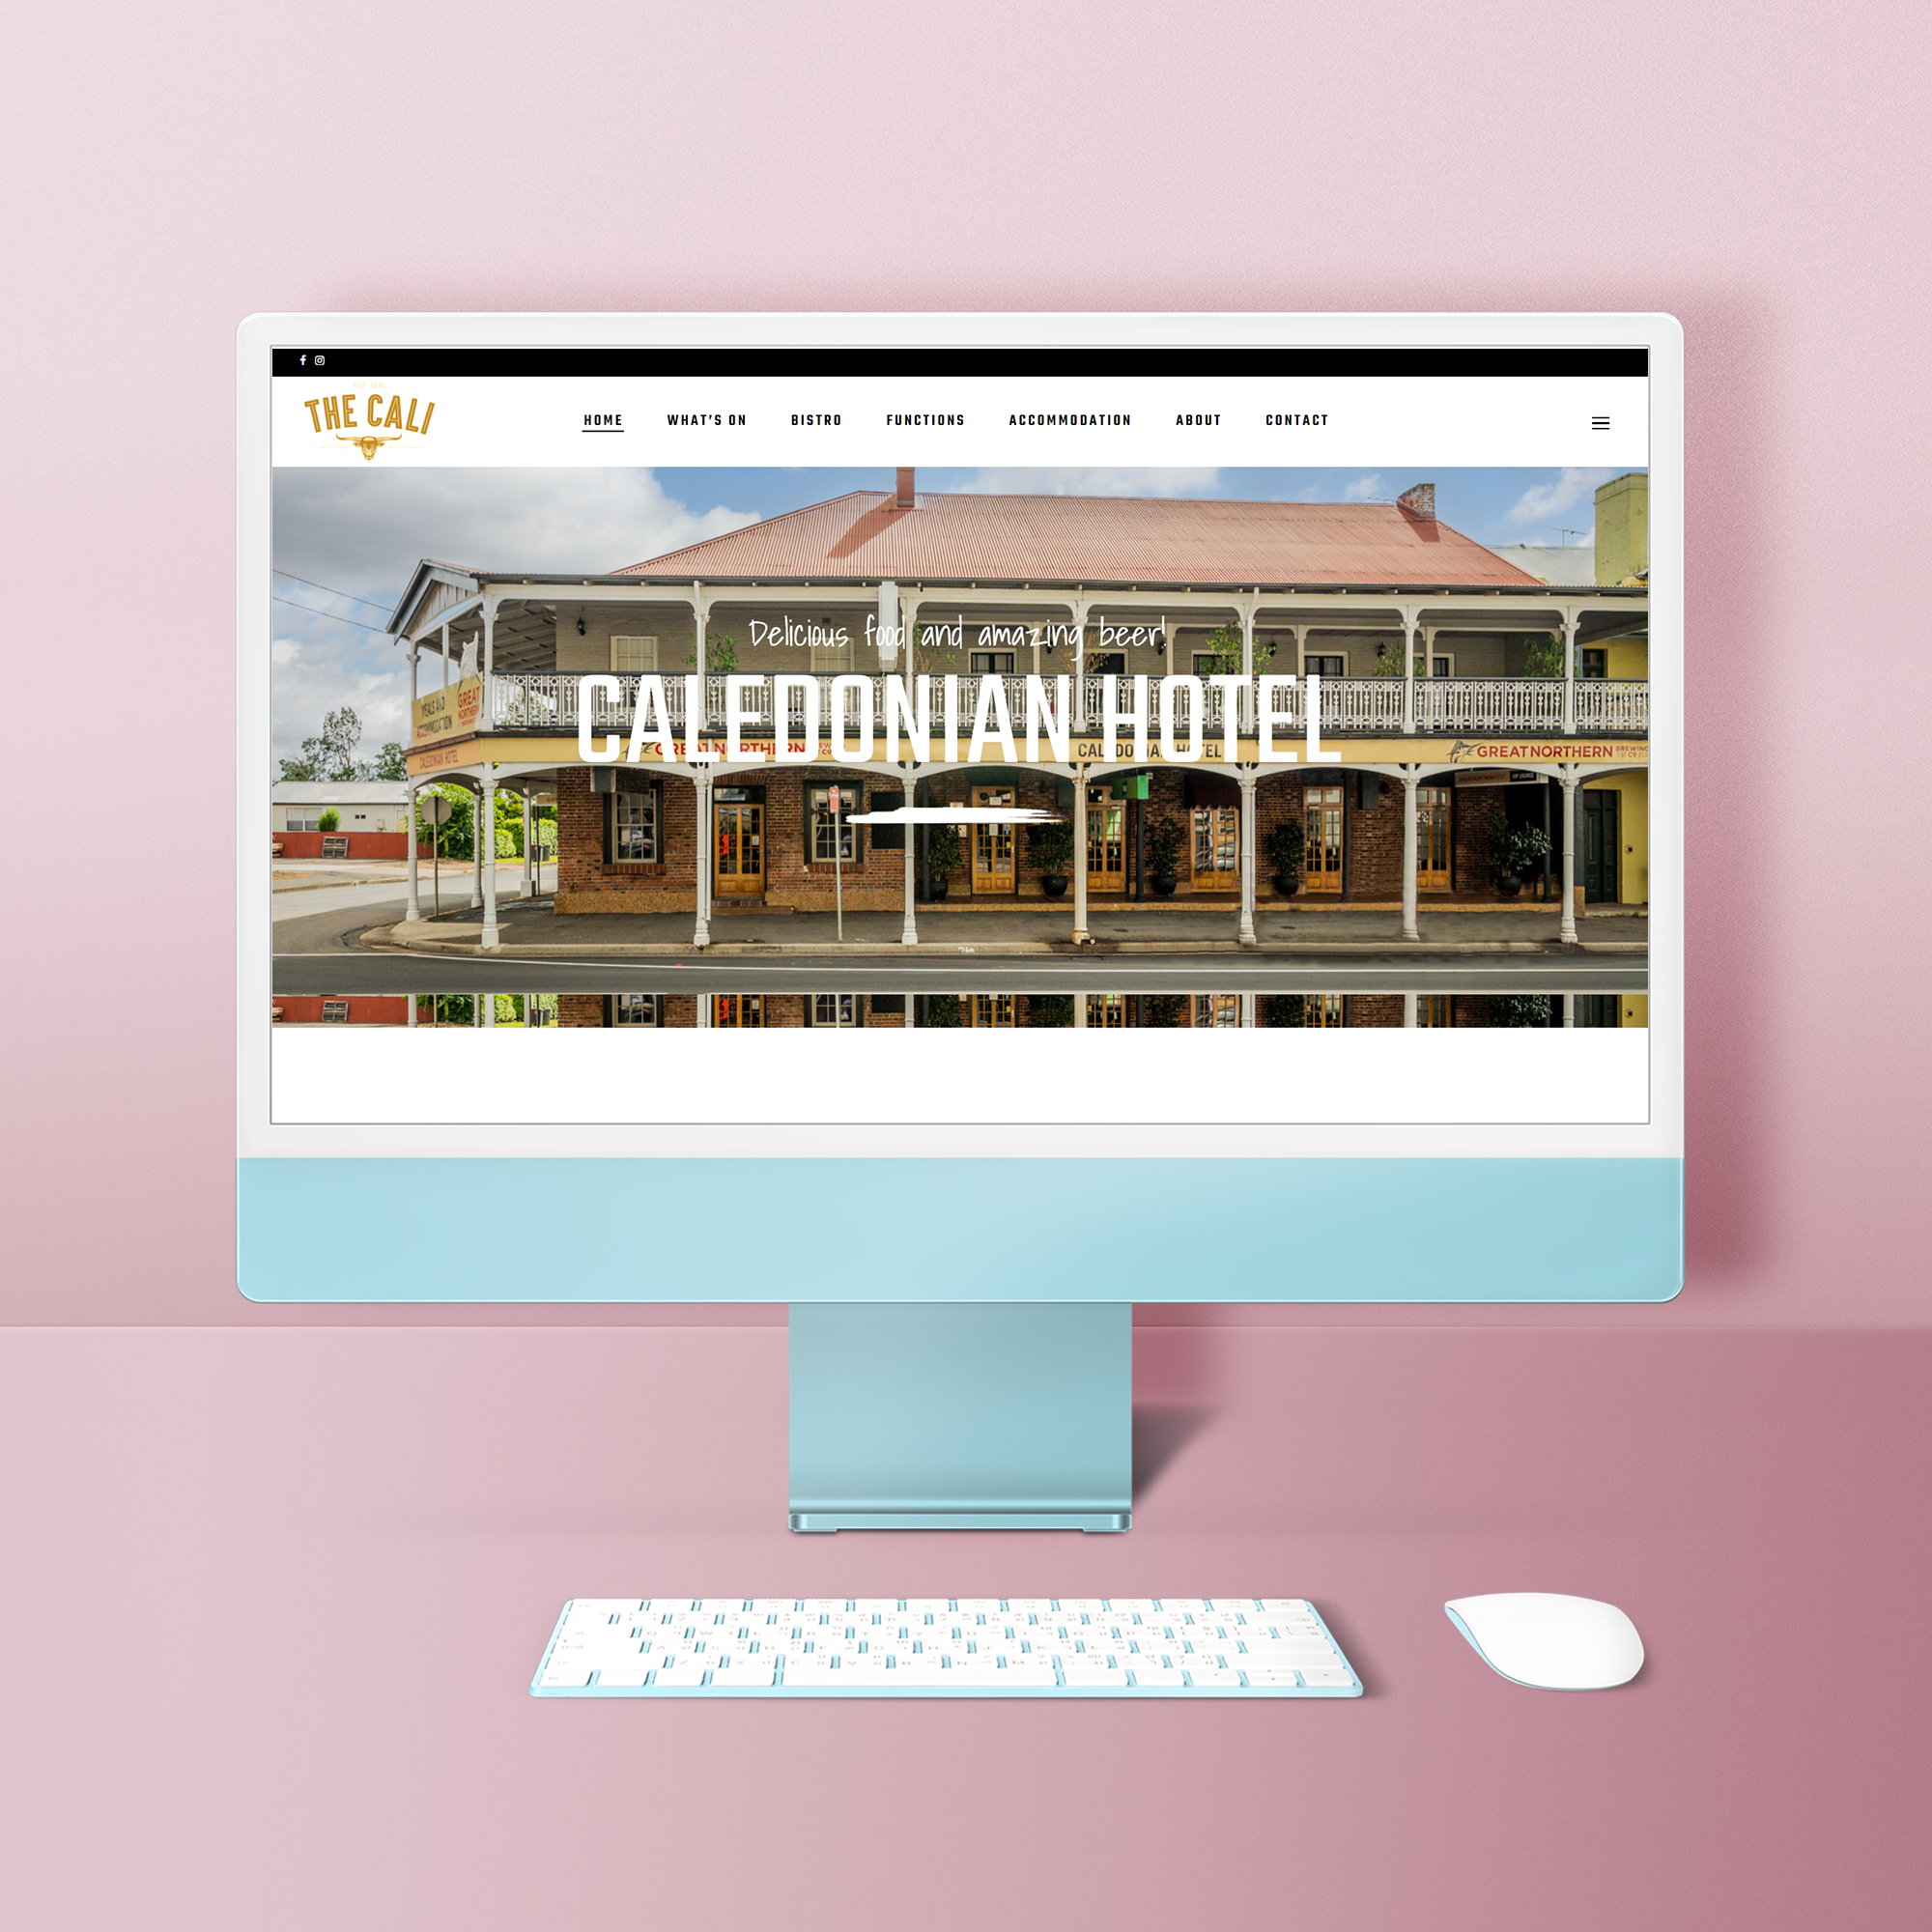 The Caledonian Hotel Website design by Think Goat